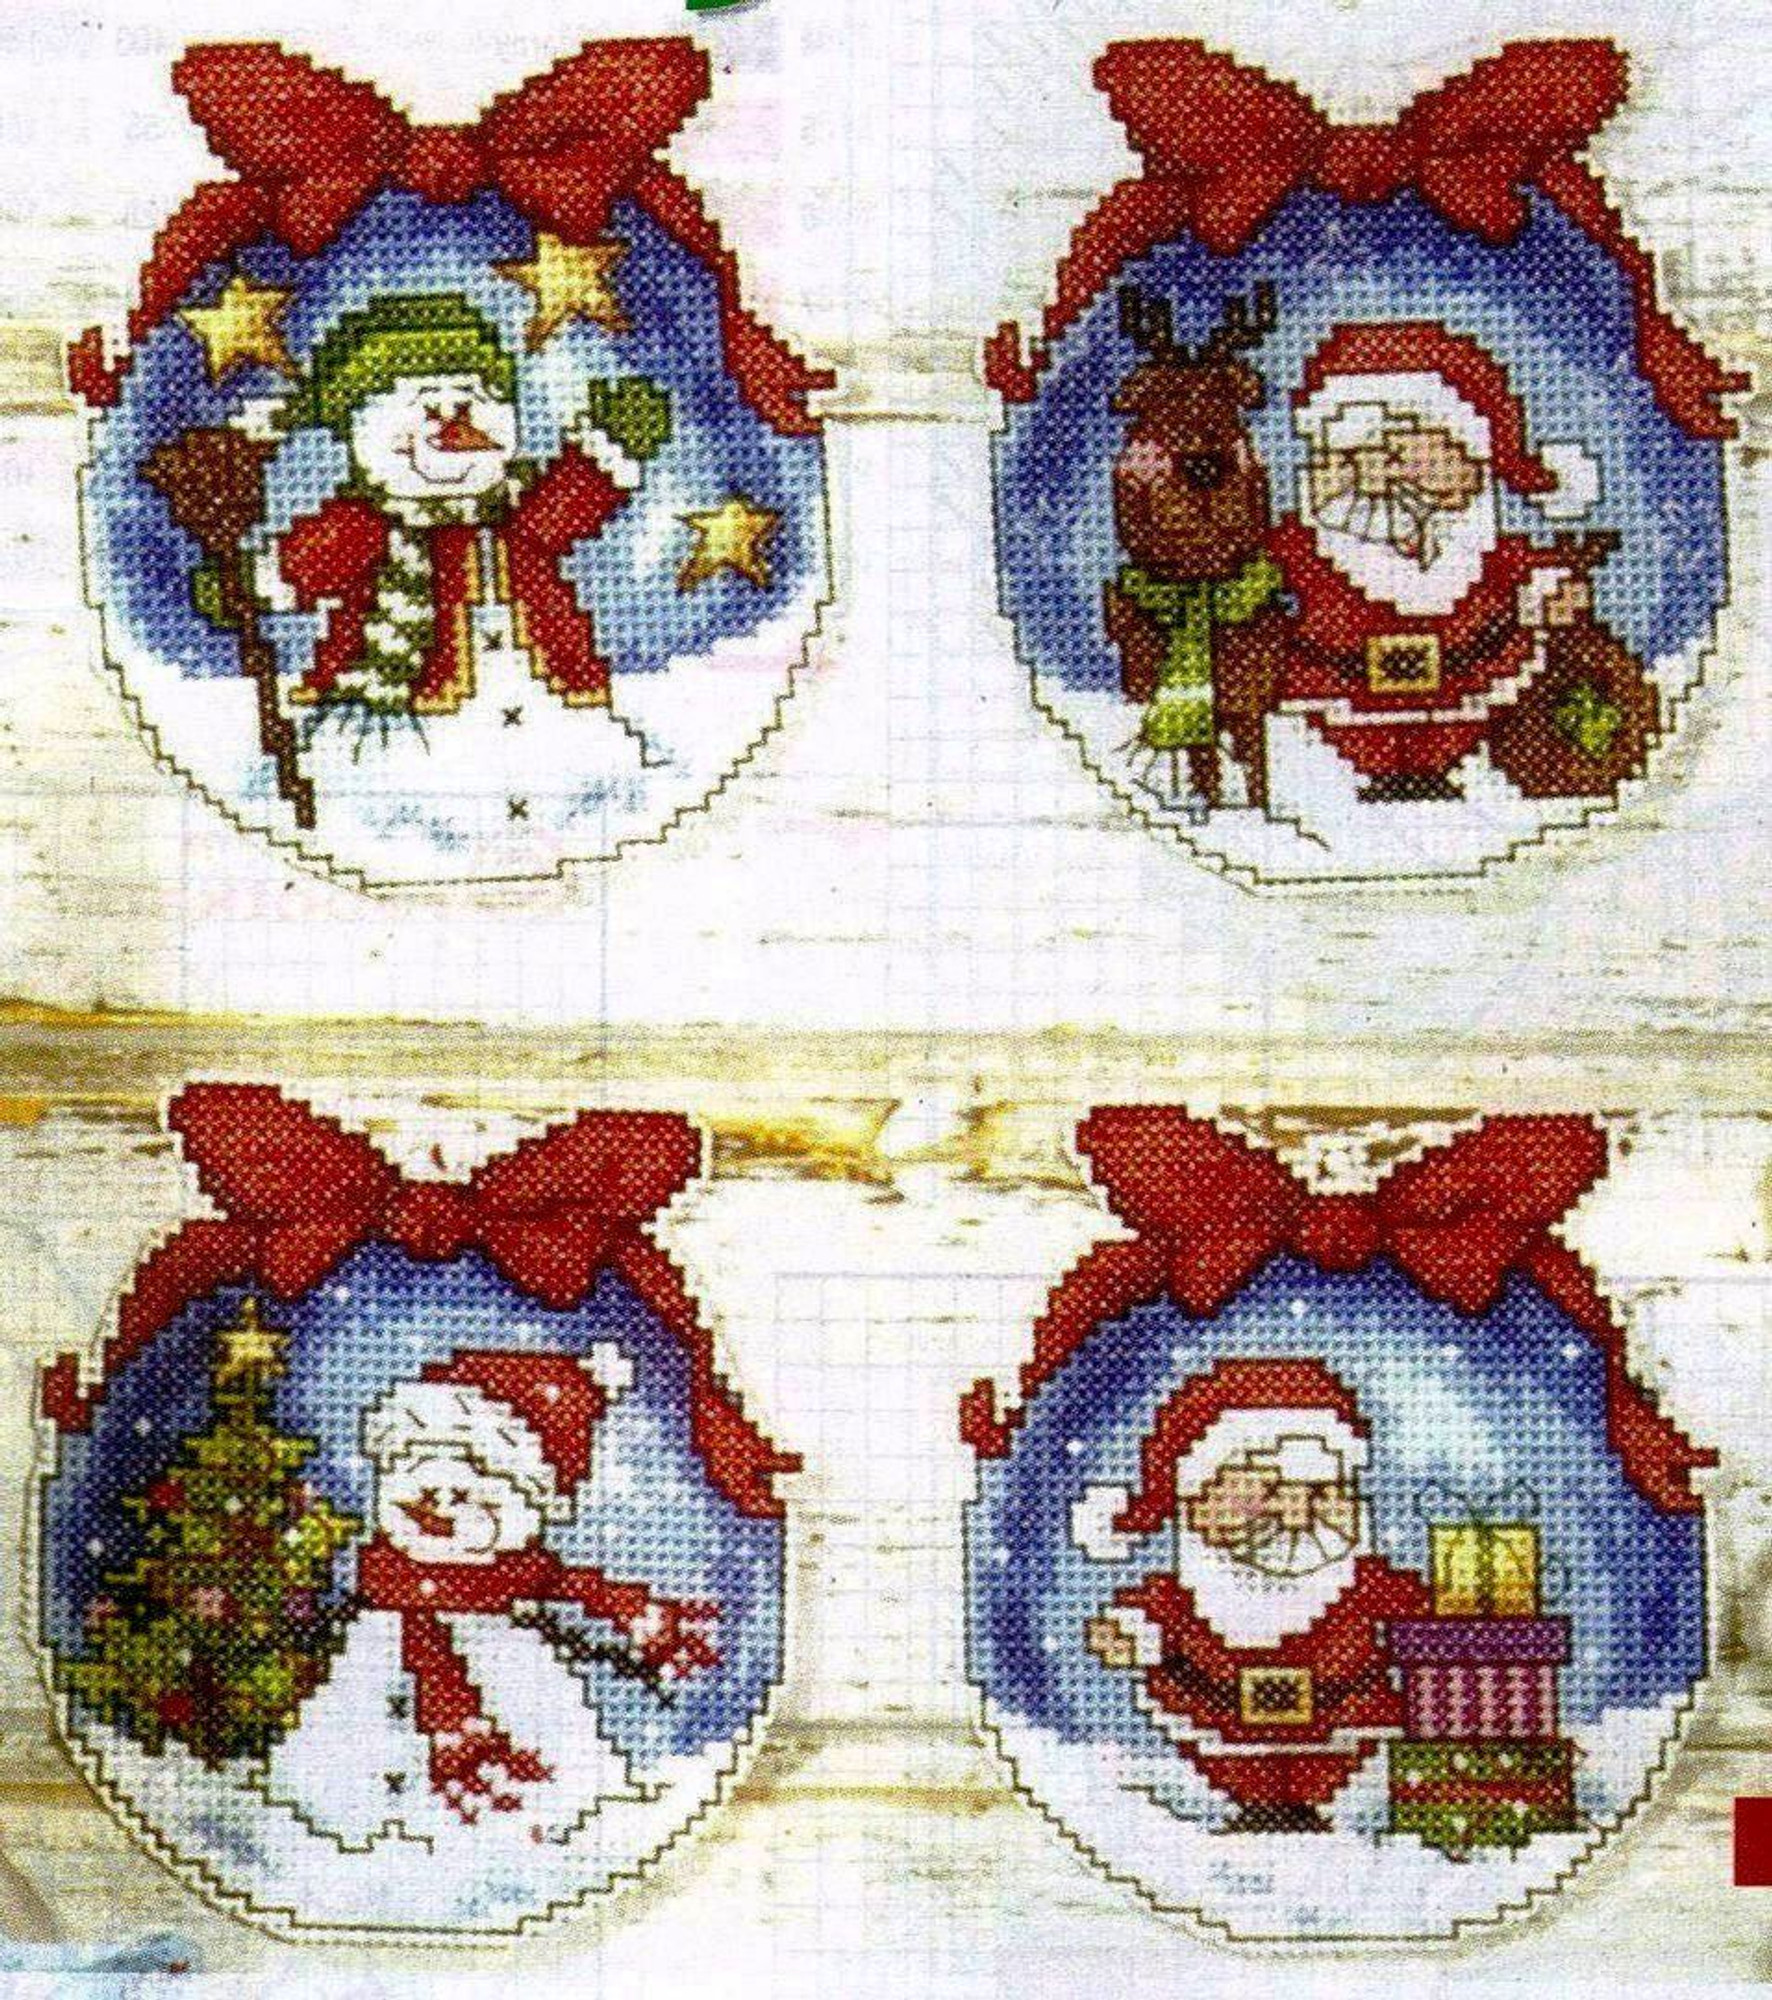 055 DIY Craft Stich Cross Stitch Bookmark Christmas Plastic Fabric  Needlework Embroidery Crafts Counted Cross-Stitching